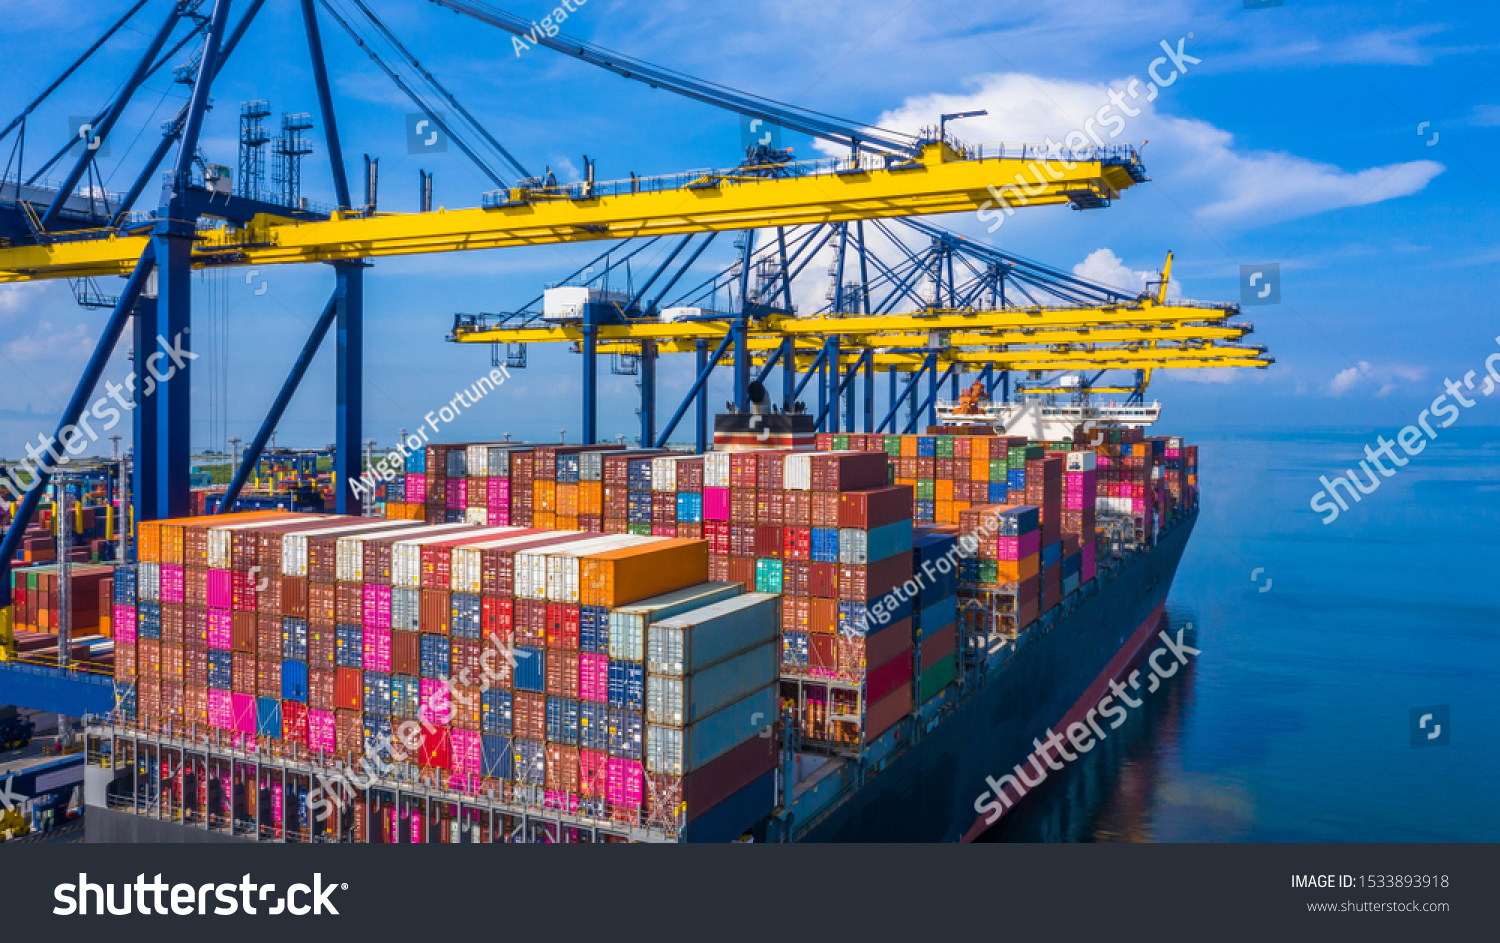 Container cargo ship at industrial port in import export commercial trade business logistic and transportation of international by container cargo ship boat in the open sea, Aerial view industry crane #1533893918